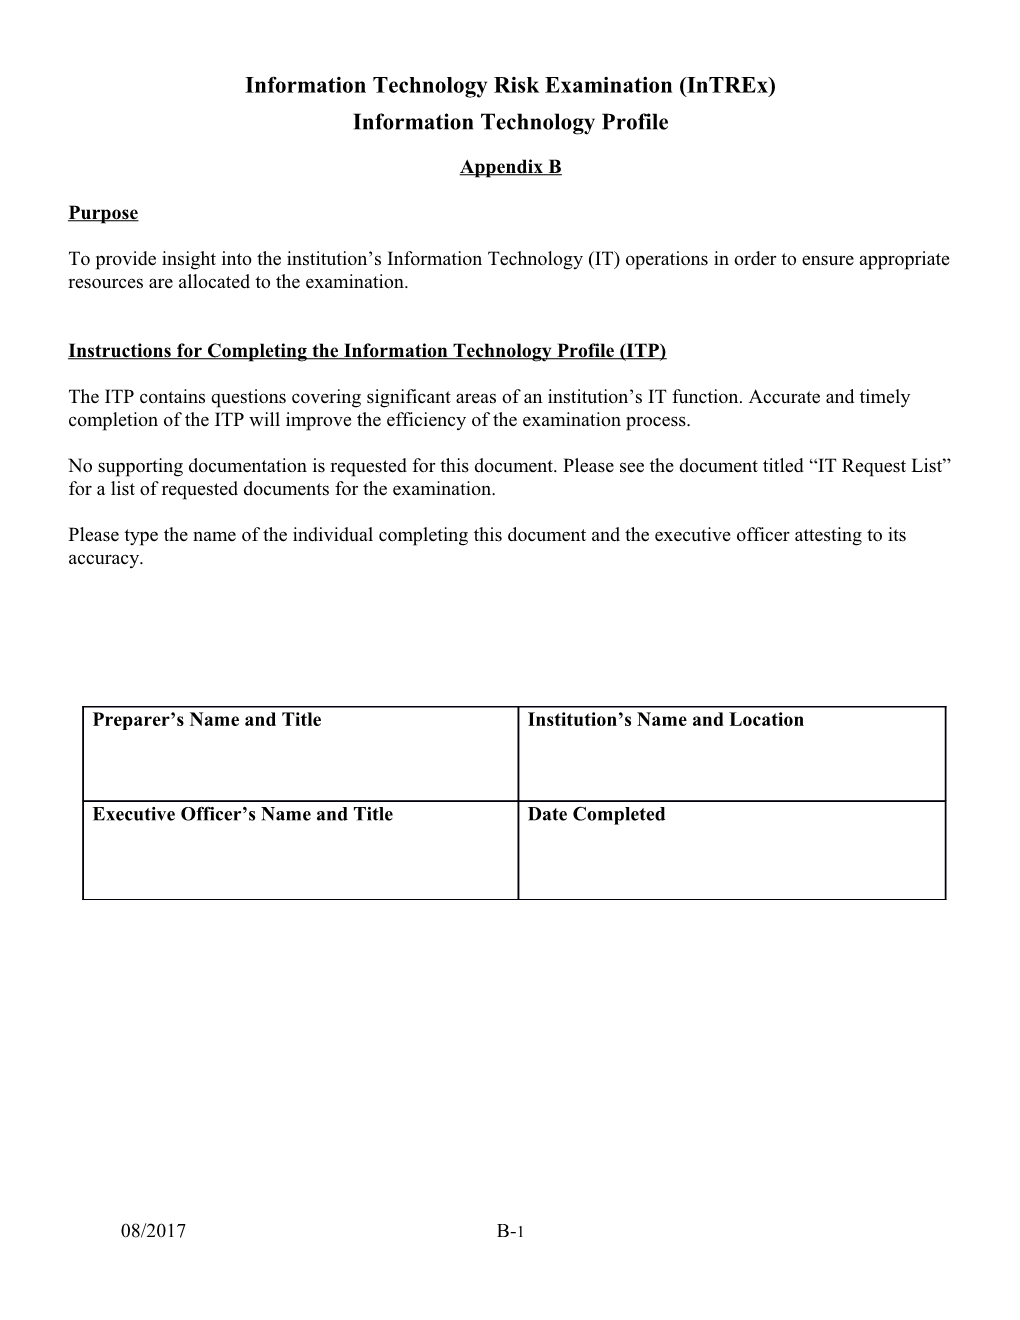 Instructions for Completing the Information Technology Profile(ITP)